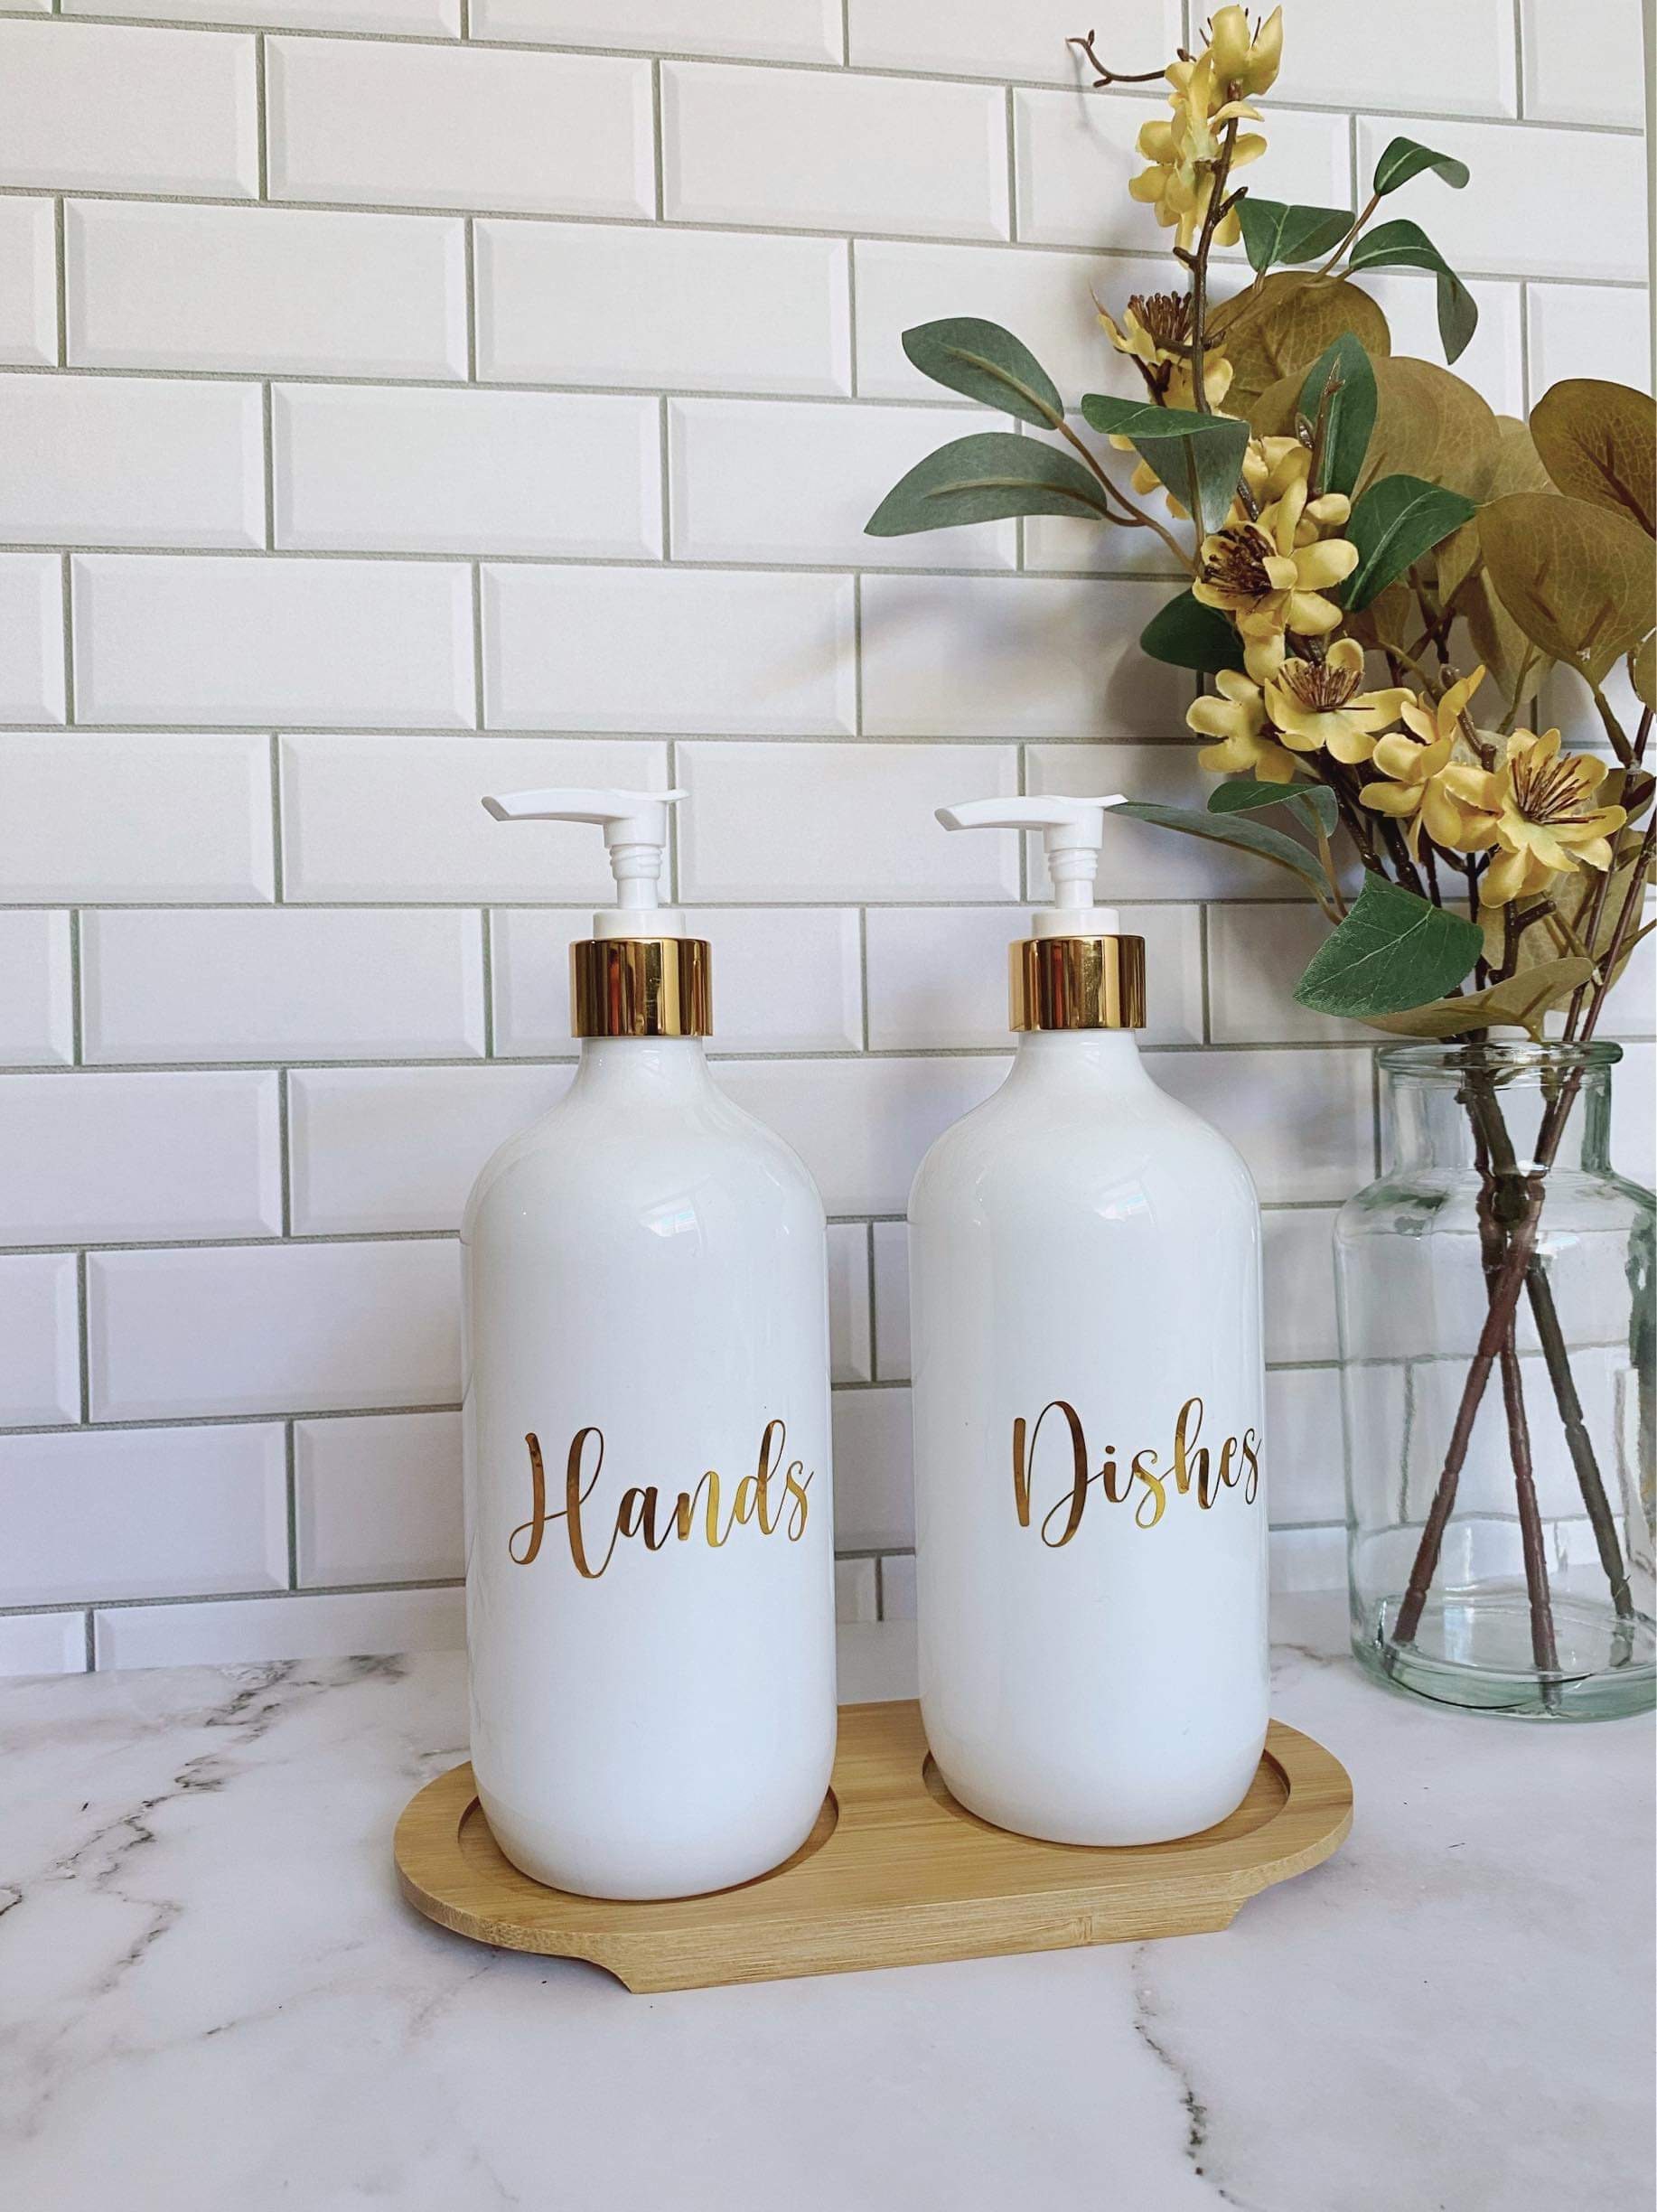 Set of 2 Elegant White Hands and Dishes Soap Dispensers 